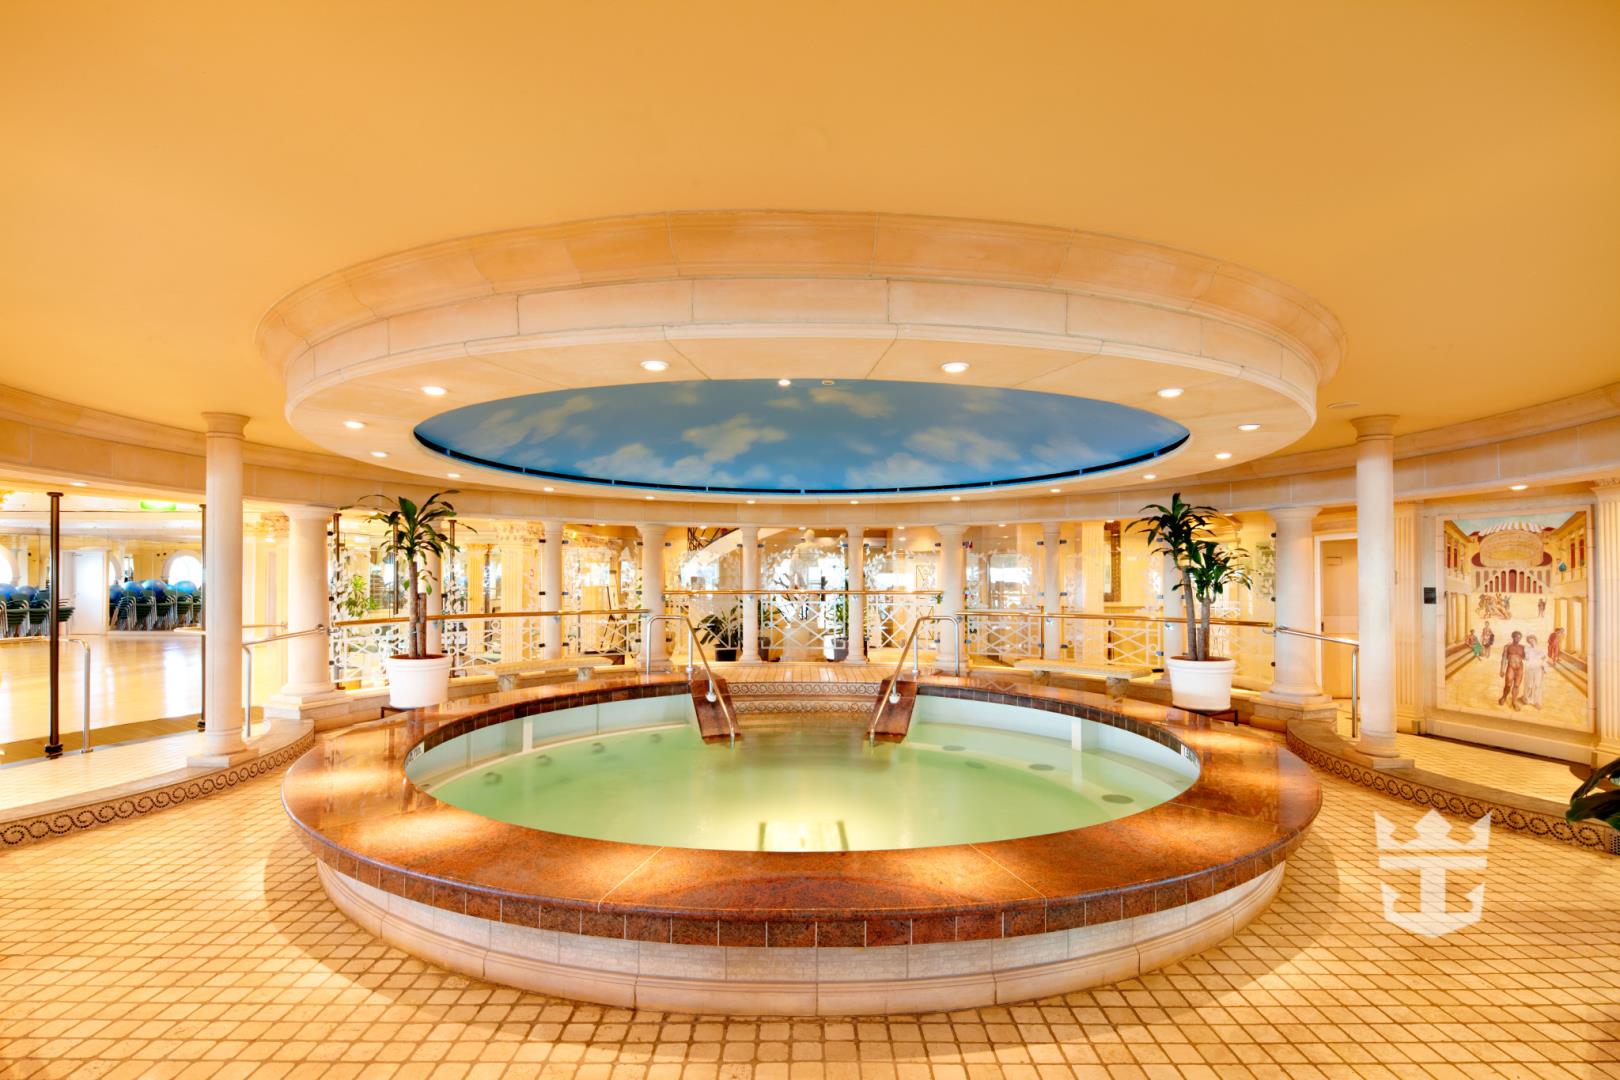 View of pool in the Vitality Spa